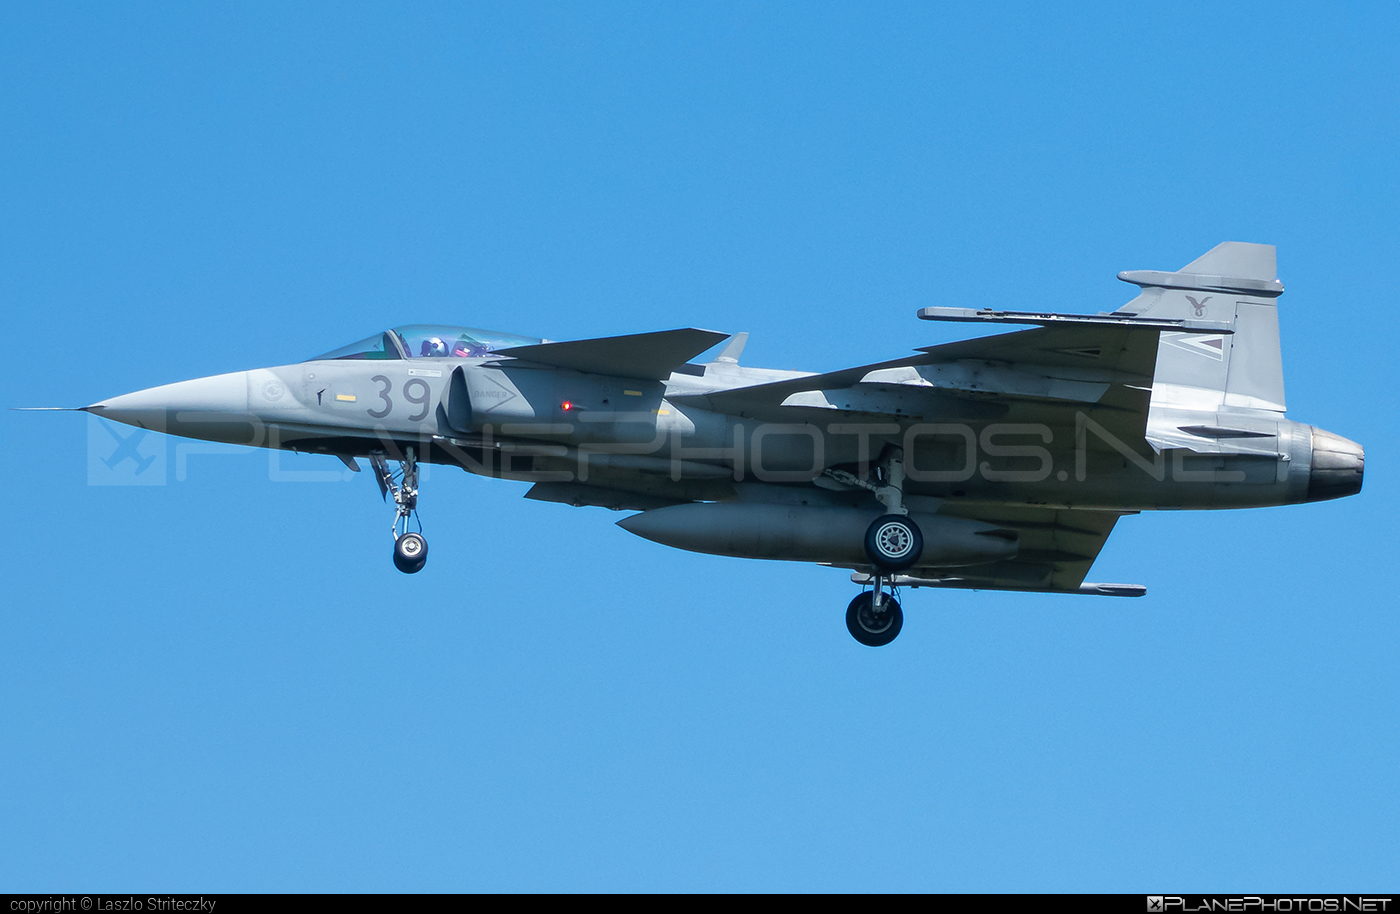 Saab JAS 39C Gripen - 39 operated by Magyar Légierő (Hungarian Air Force) #gripen #hungarianairforce #jas39 #jas39c #jas39gripen #magyarlegiero #saab